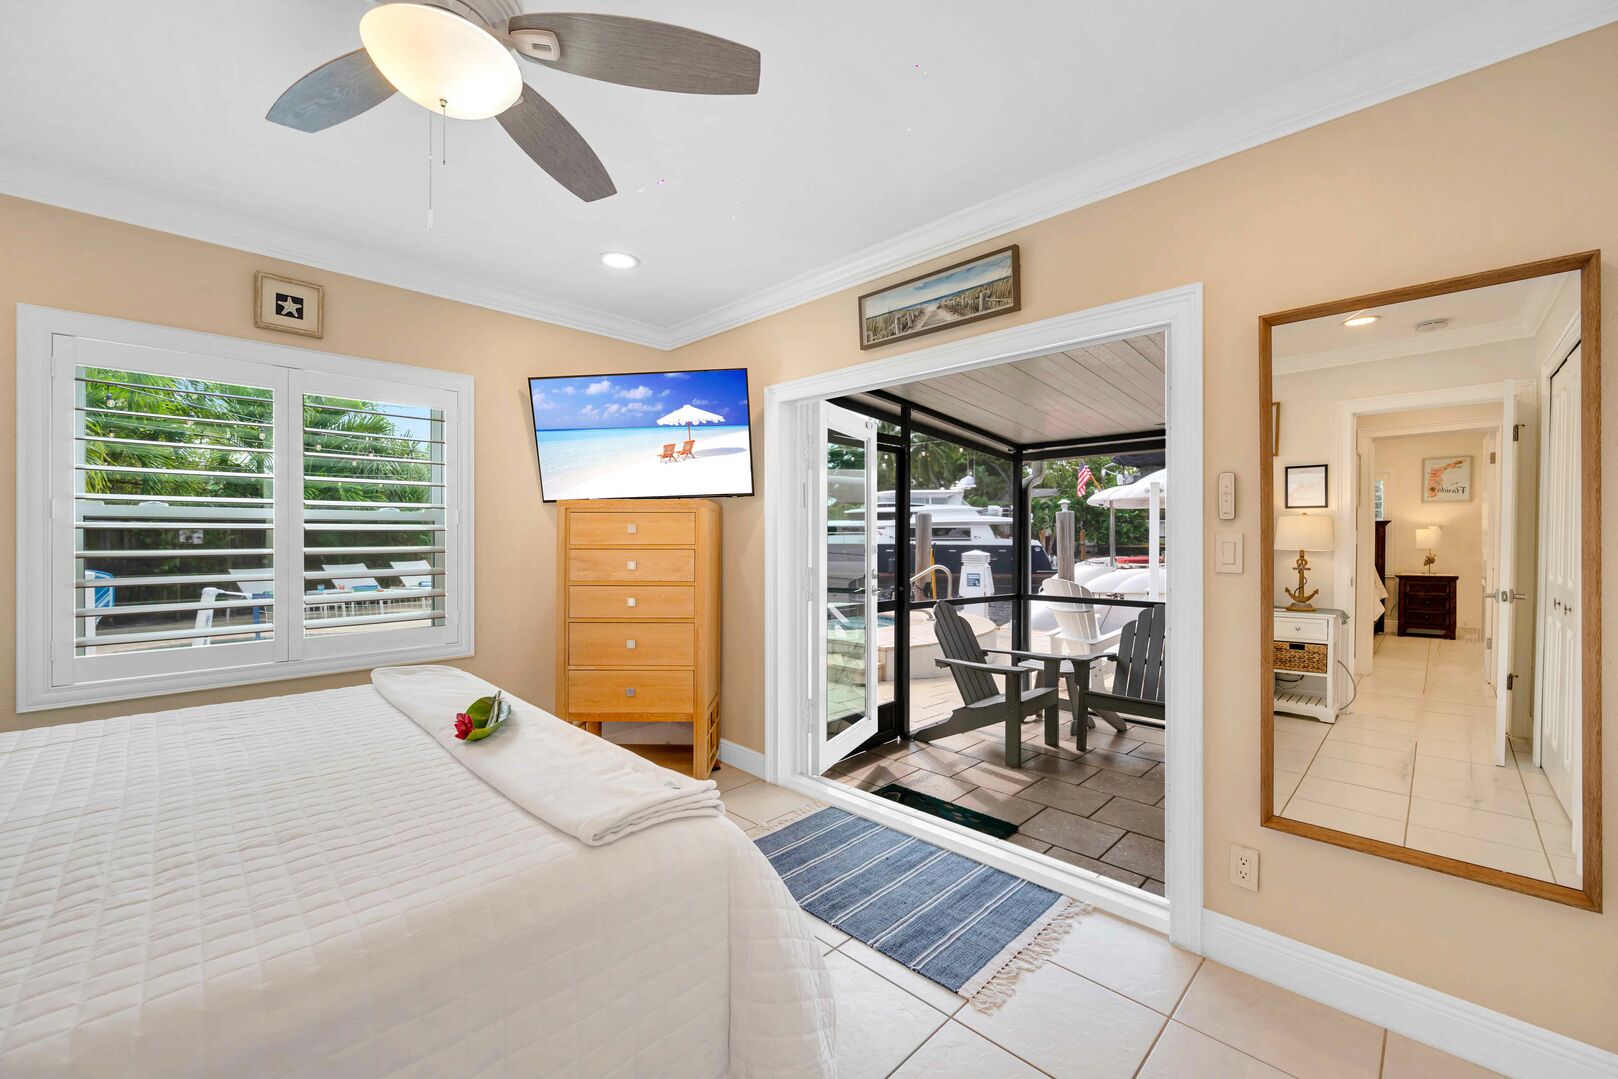 Bedroom 3 boasts a king bed and has direct access to the screened-in outdoor seating area. Perfect for sipping your morning coffee or enjoying the view of the pool and waterfront.